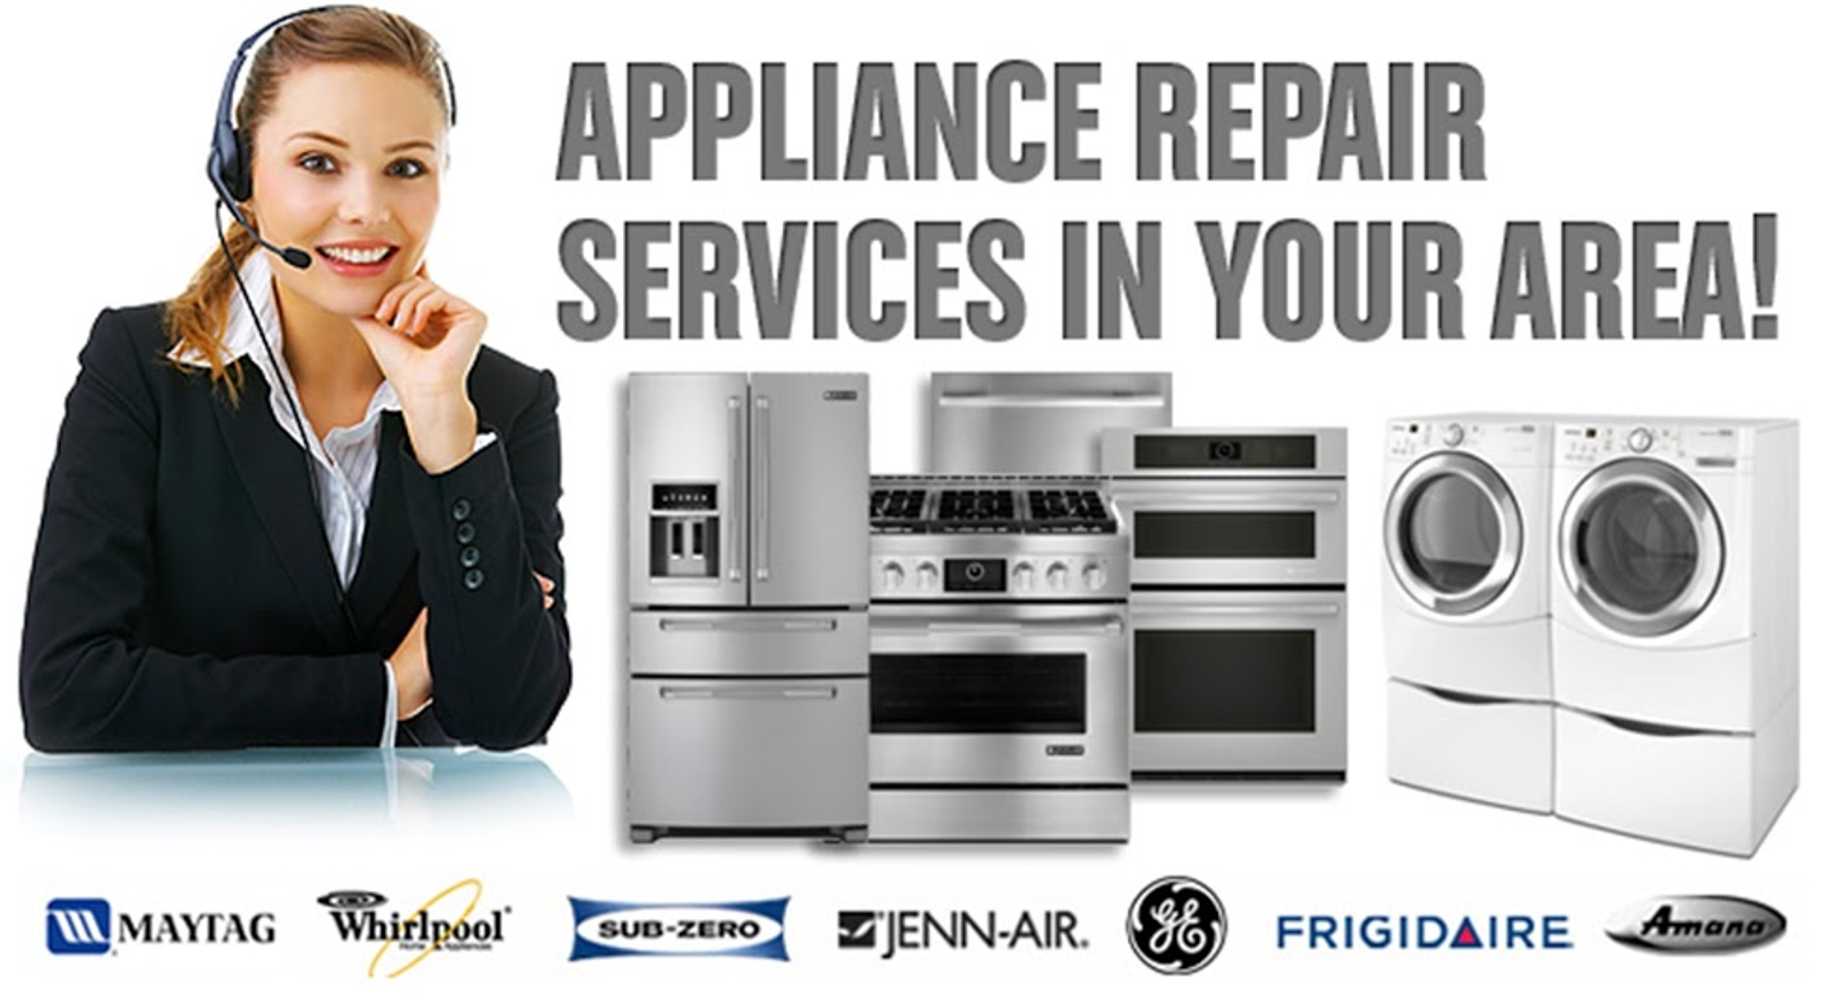 Projects by Appliance Repair Pros Atlanta